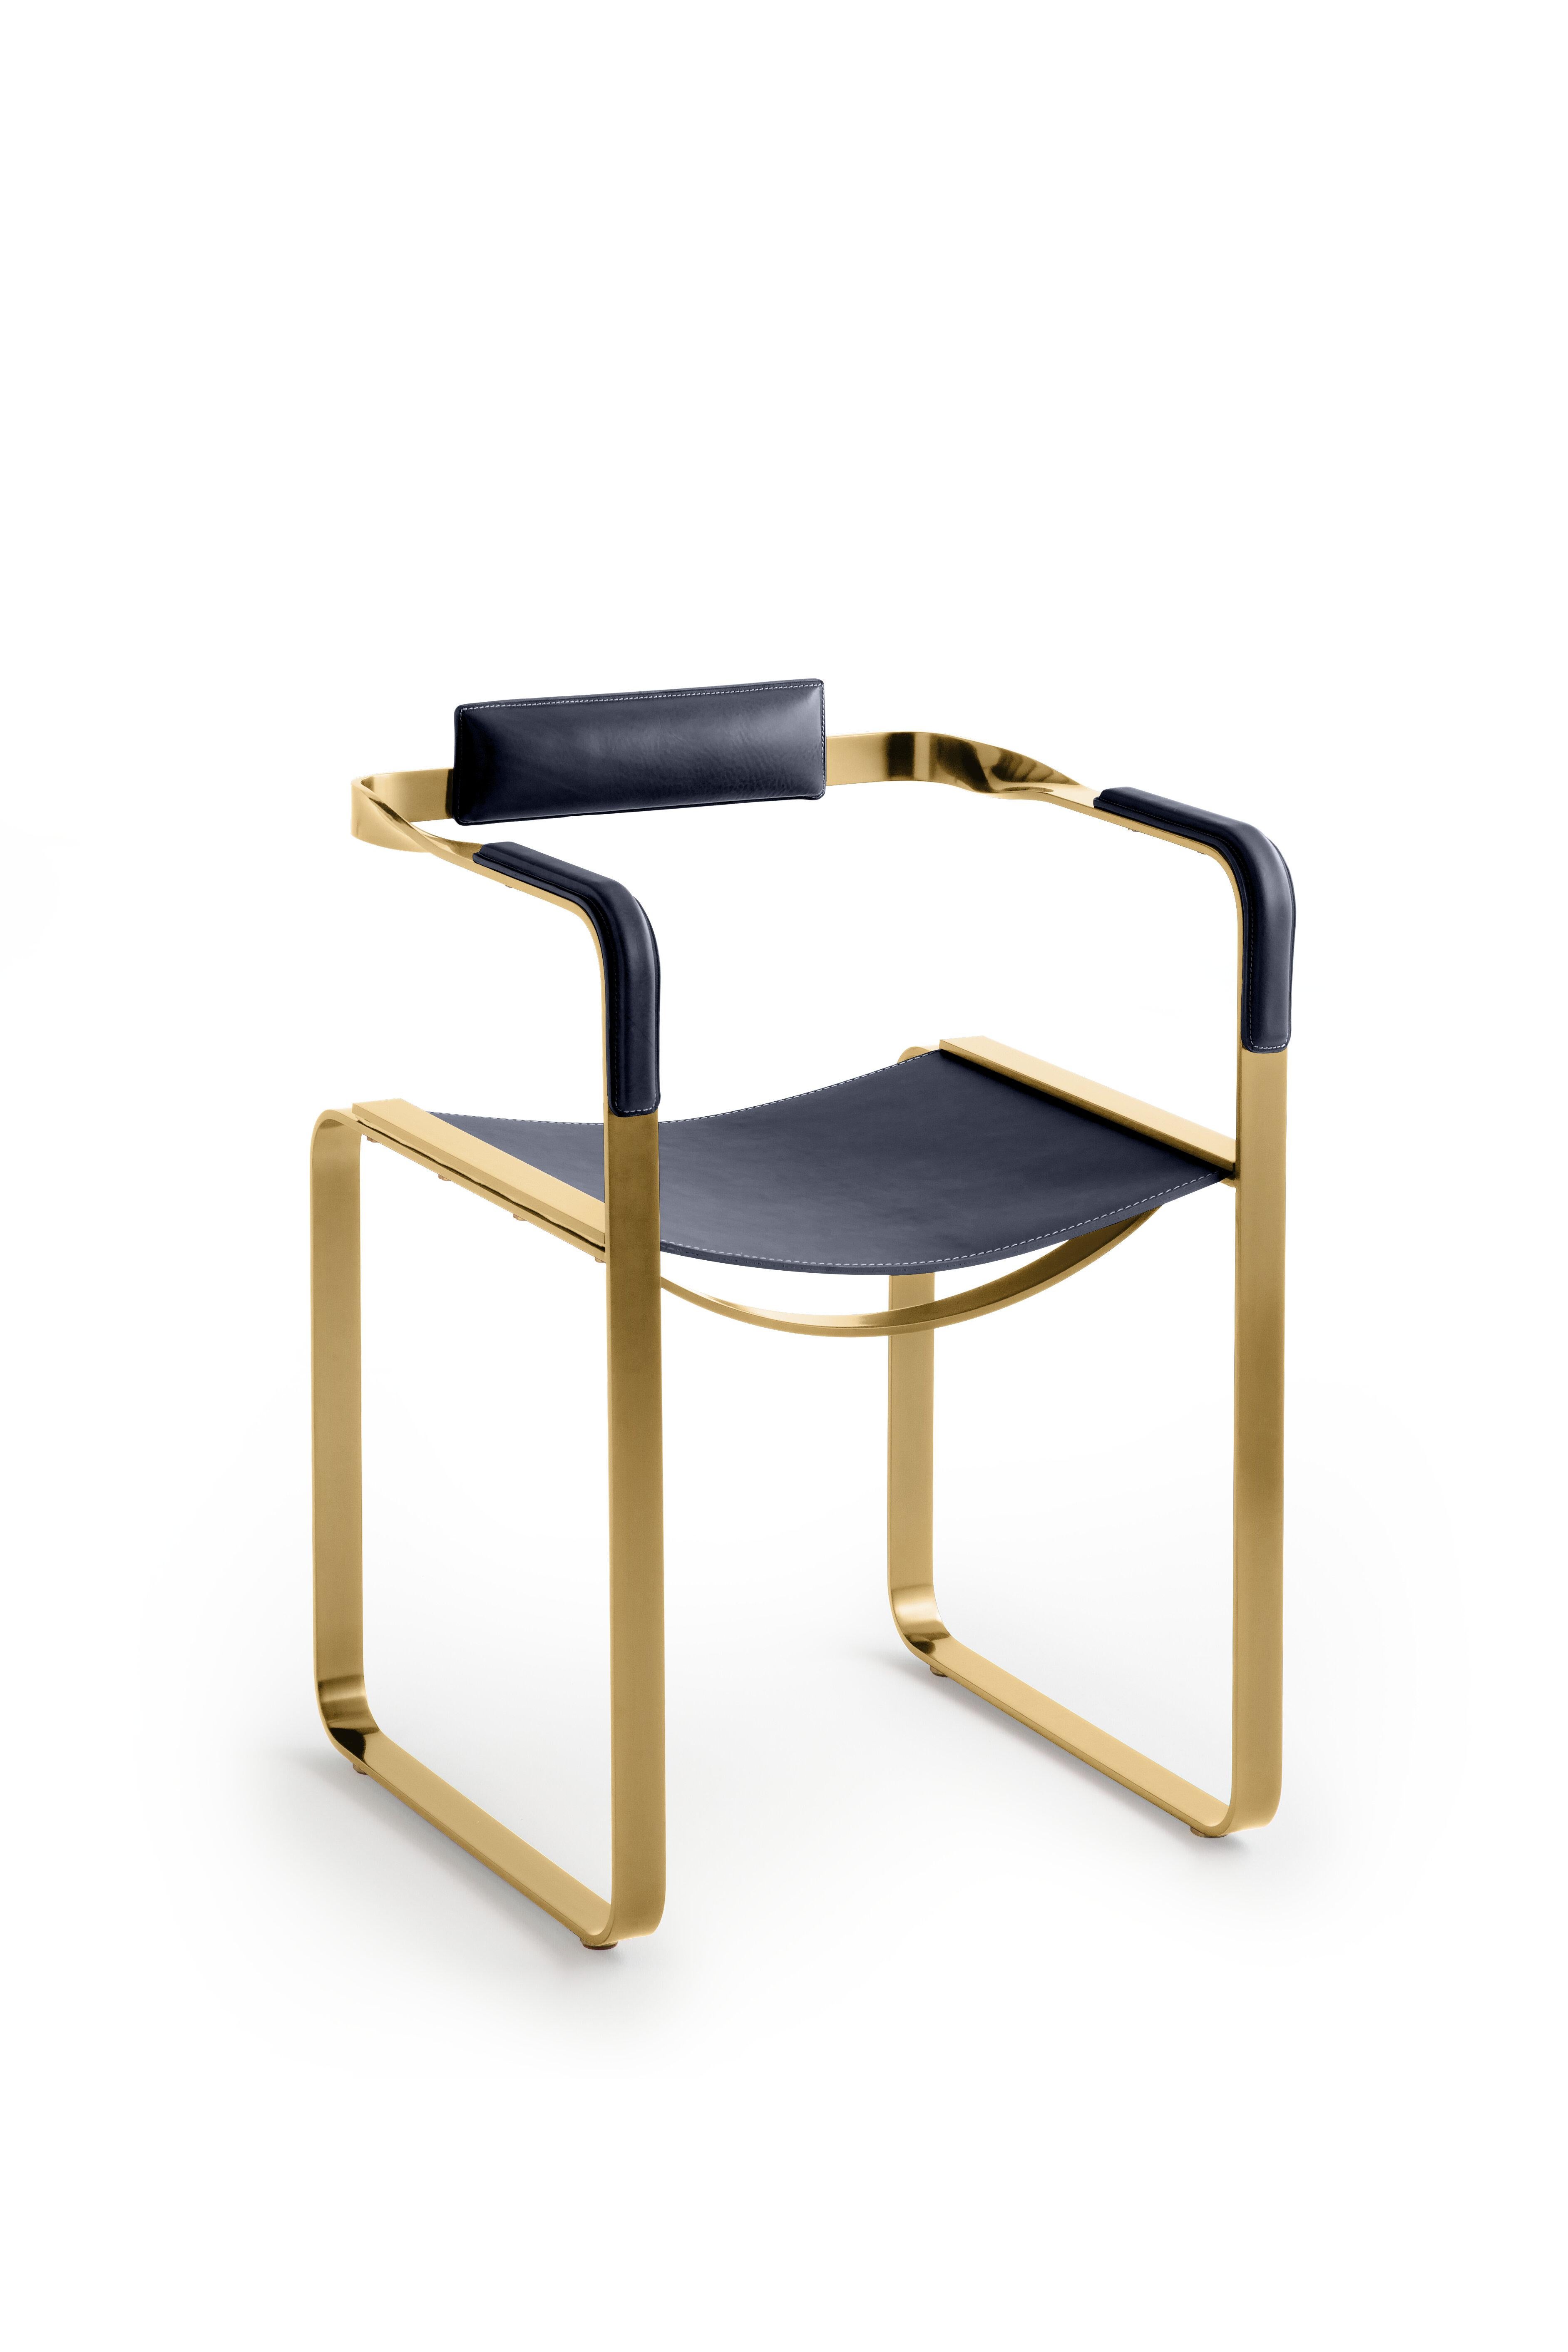 Set of 2 Armchair, Aged Brass Steel & Blue Navy Saddle, Contemporary Style In New Condition For Sale In Alcoy, Alicante